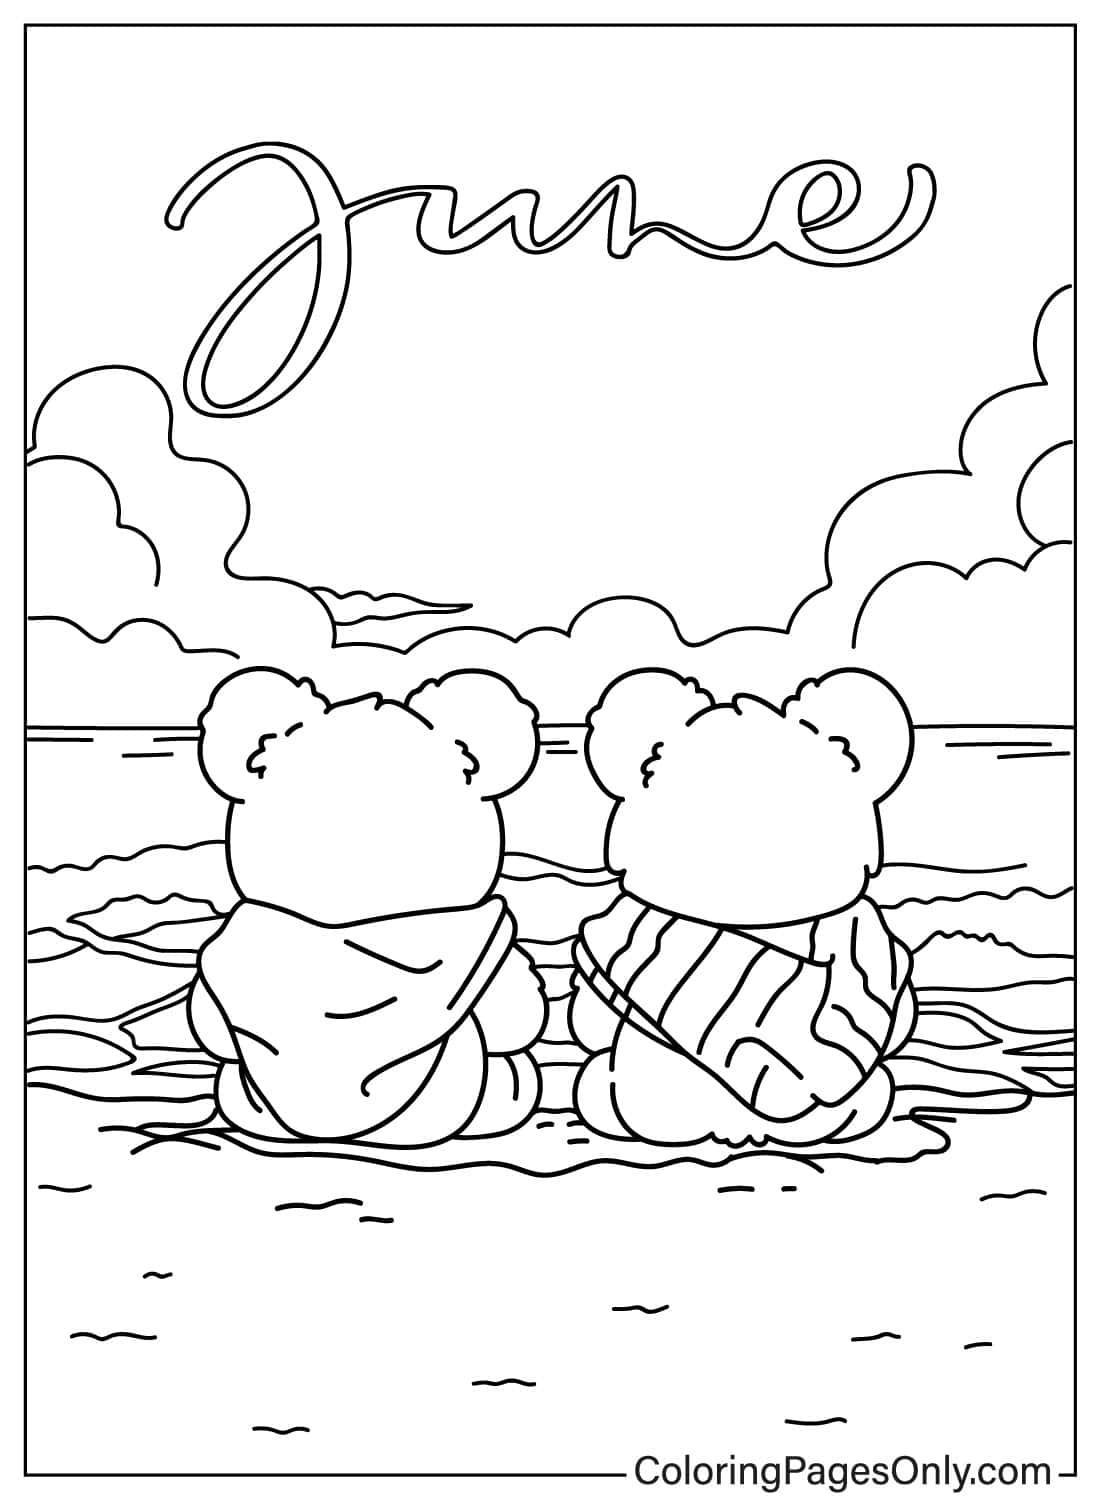 Two Bears Sitting and Watching the Sea from June